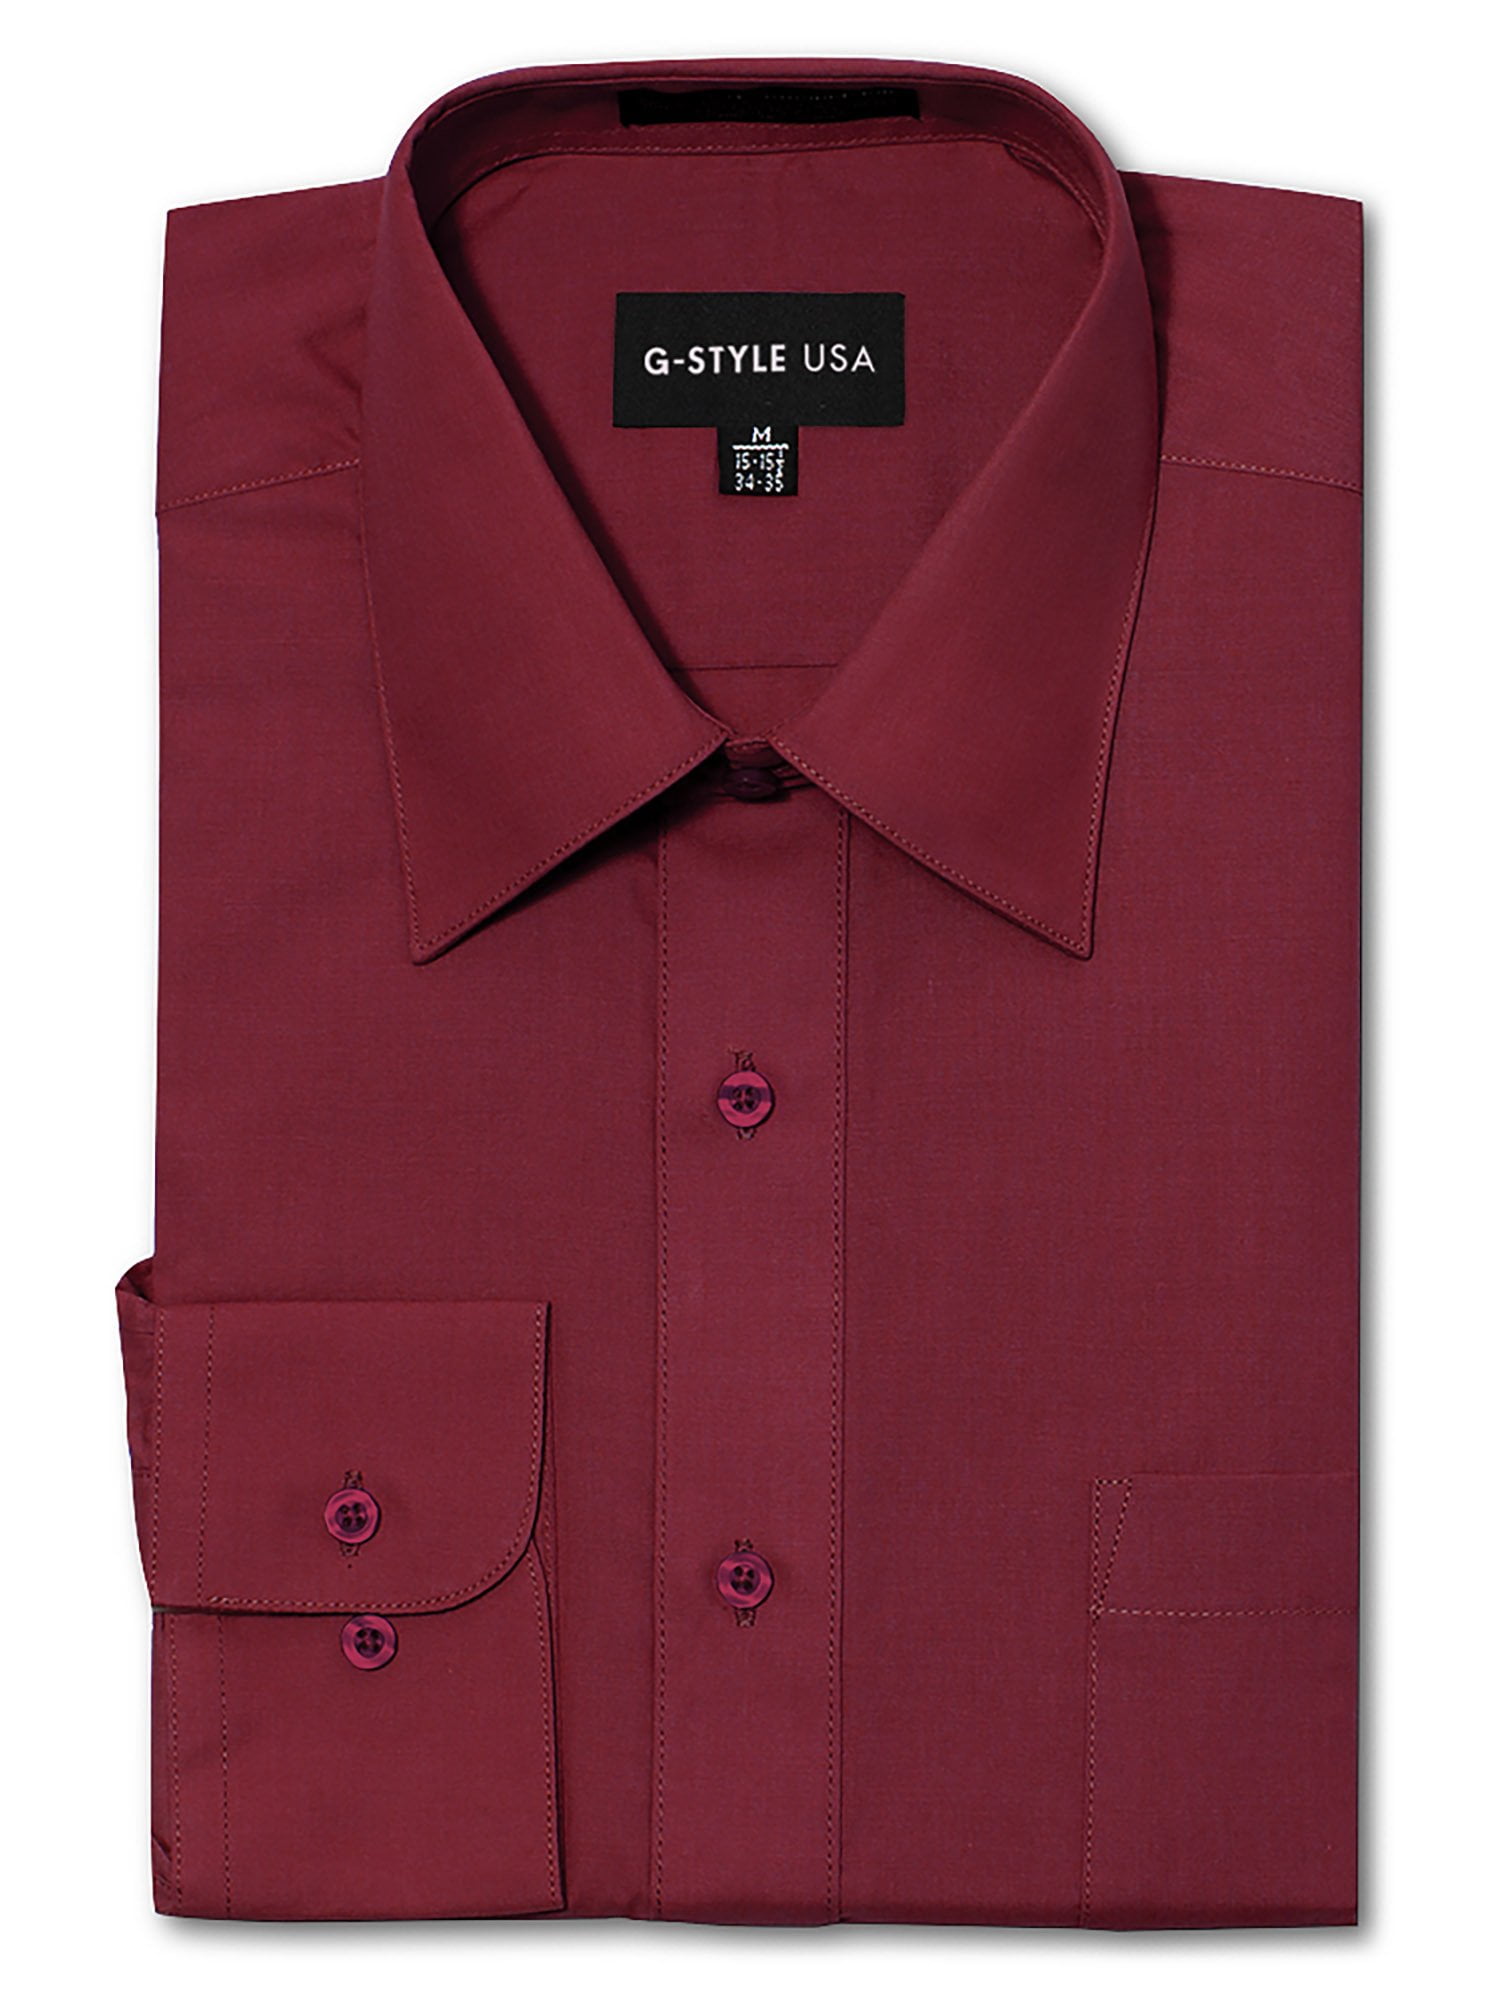 G-Style USA Mens Regular Fit Long Sleeve Solid Color Dress Shirts -  BURGUNDY - Small - 30-31